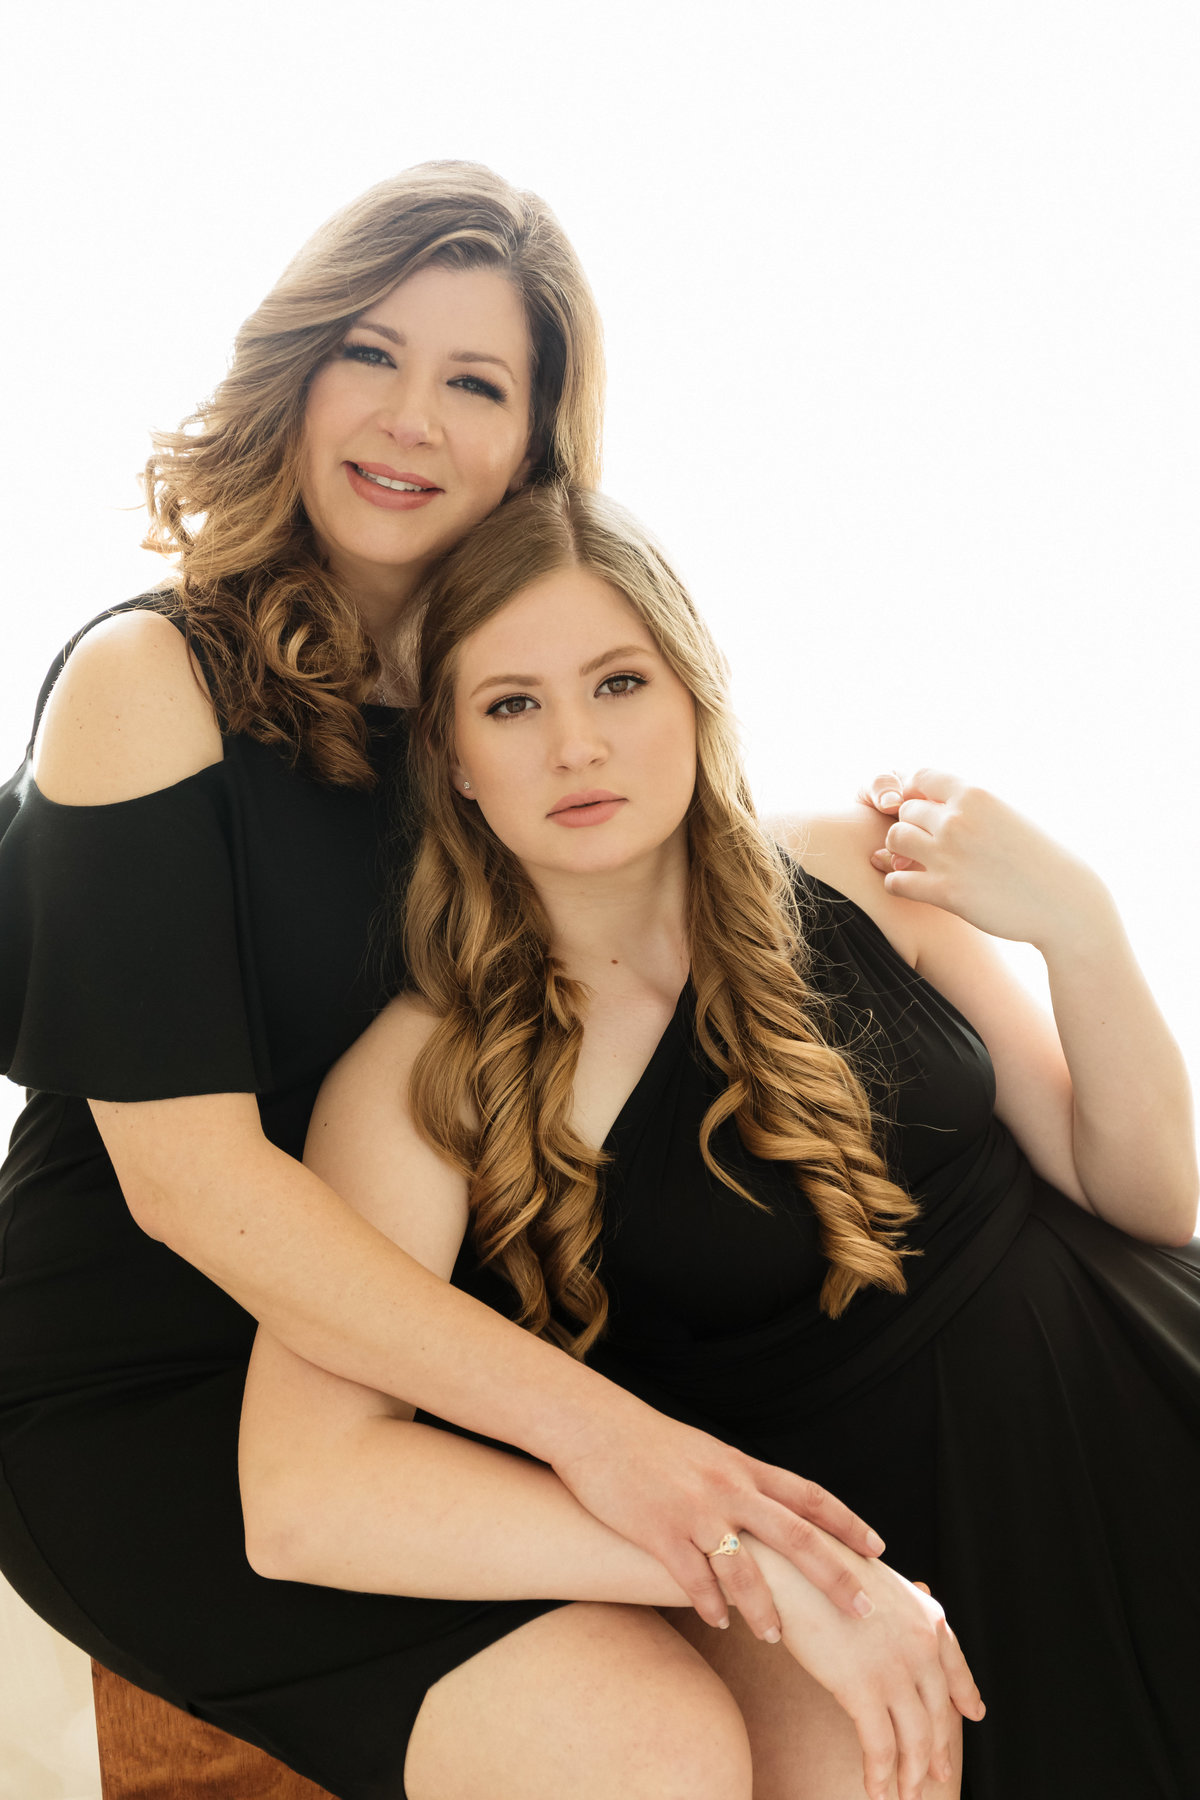 Beauty, Mother Daughter, Mother Child, Family, Legacy Photoshoot, Austin, Tx Photographer, Austin Local, Felicia Reed Photography-18